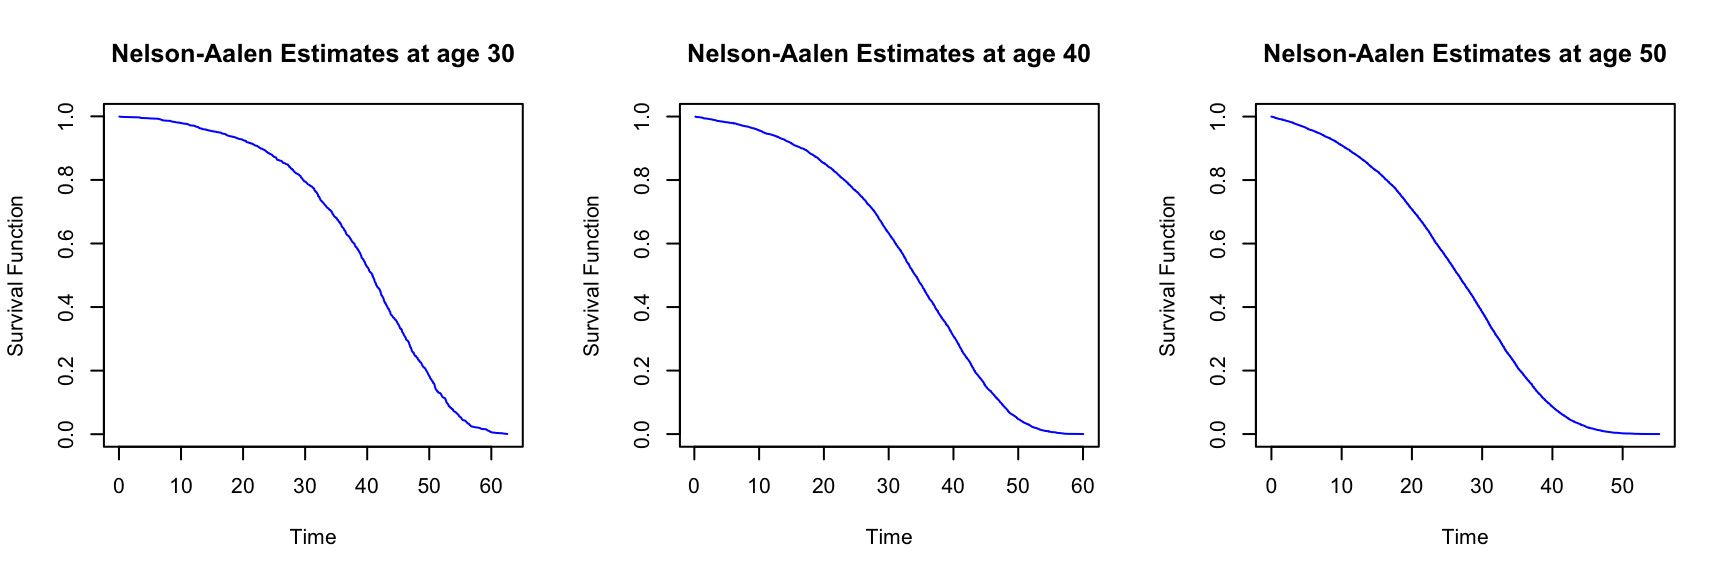 Nelson-Aalen survival function estimates for females of age 30 (left), 40 (middle) and 50 (right) based on the insurer dataset